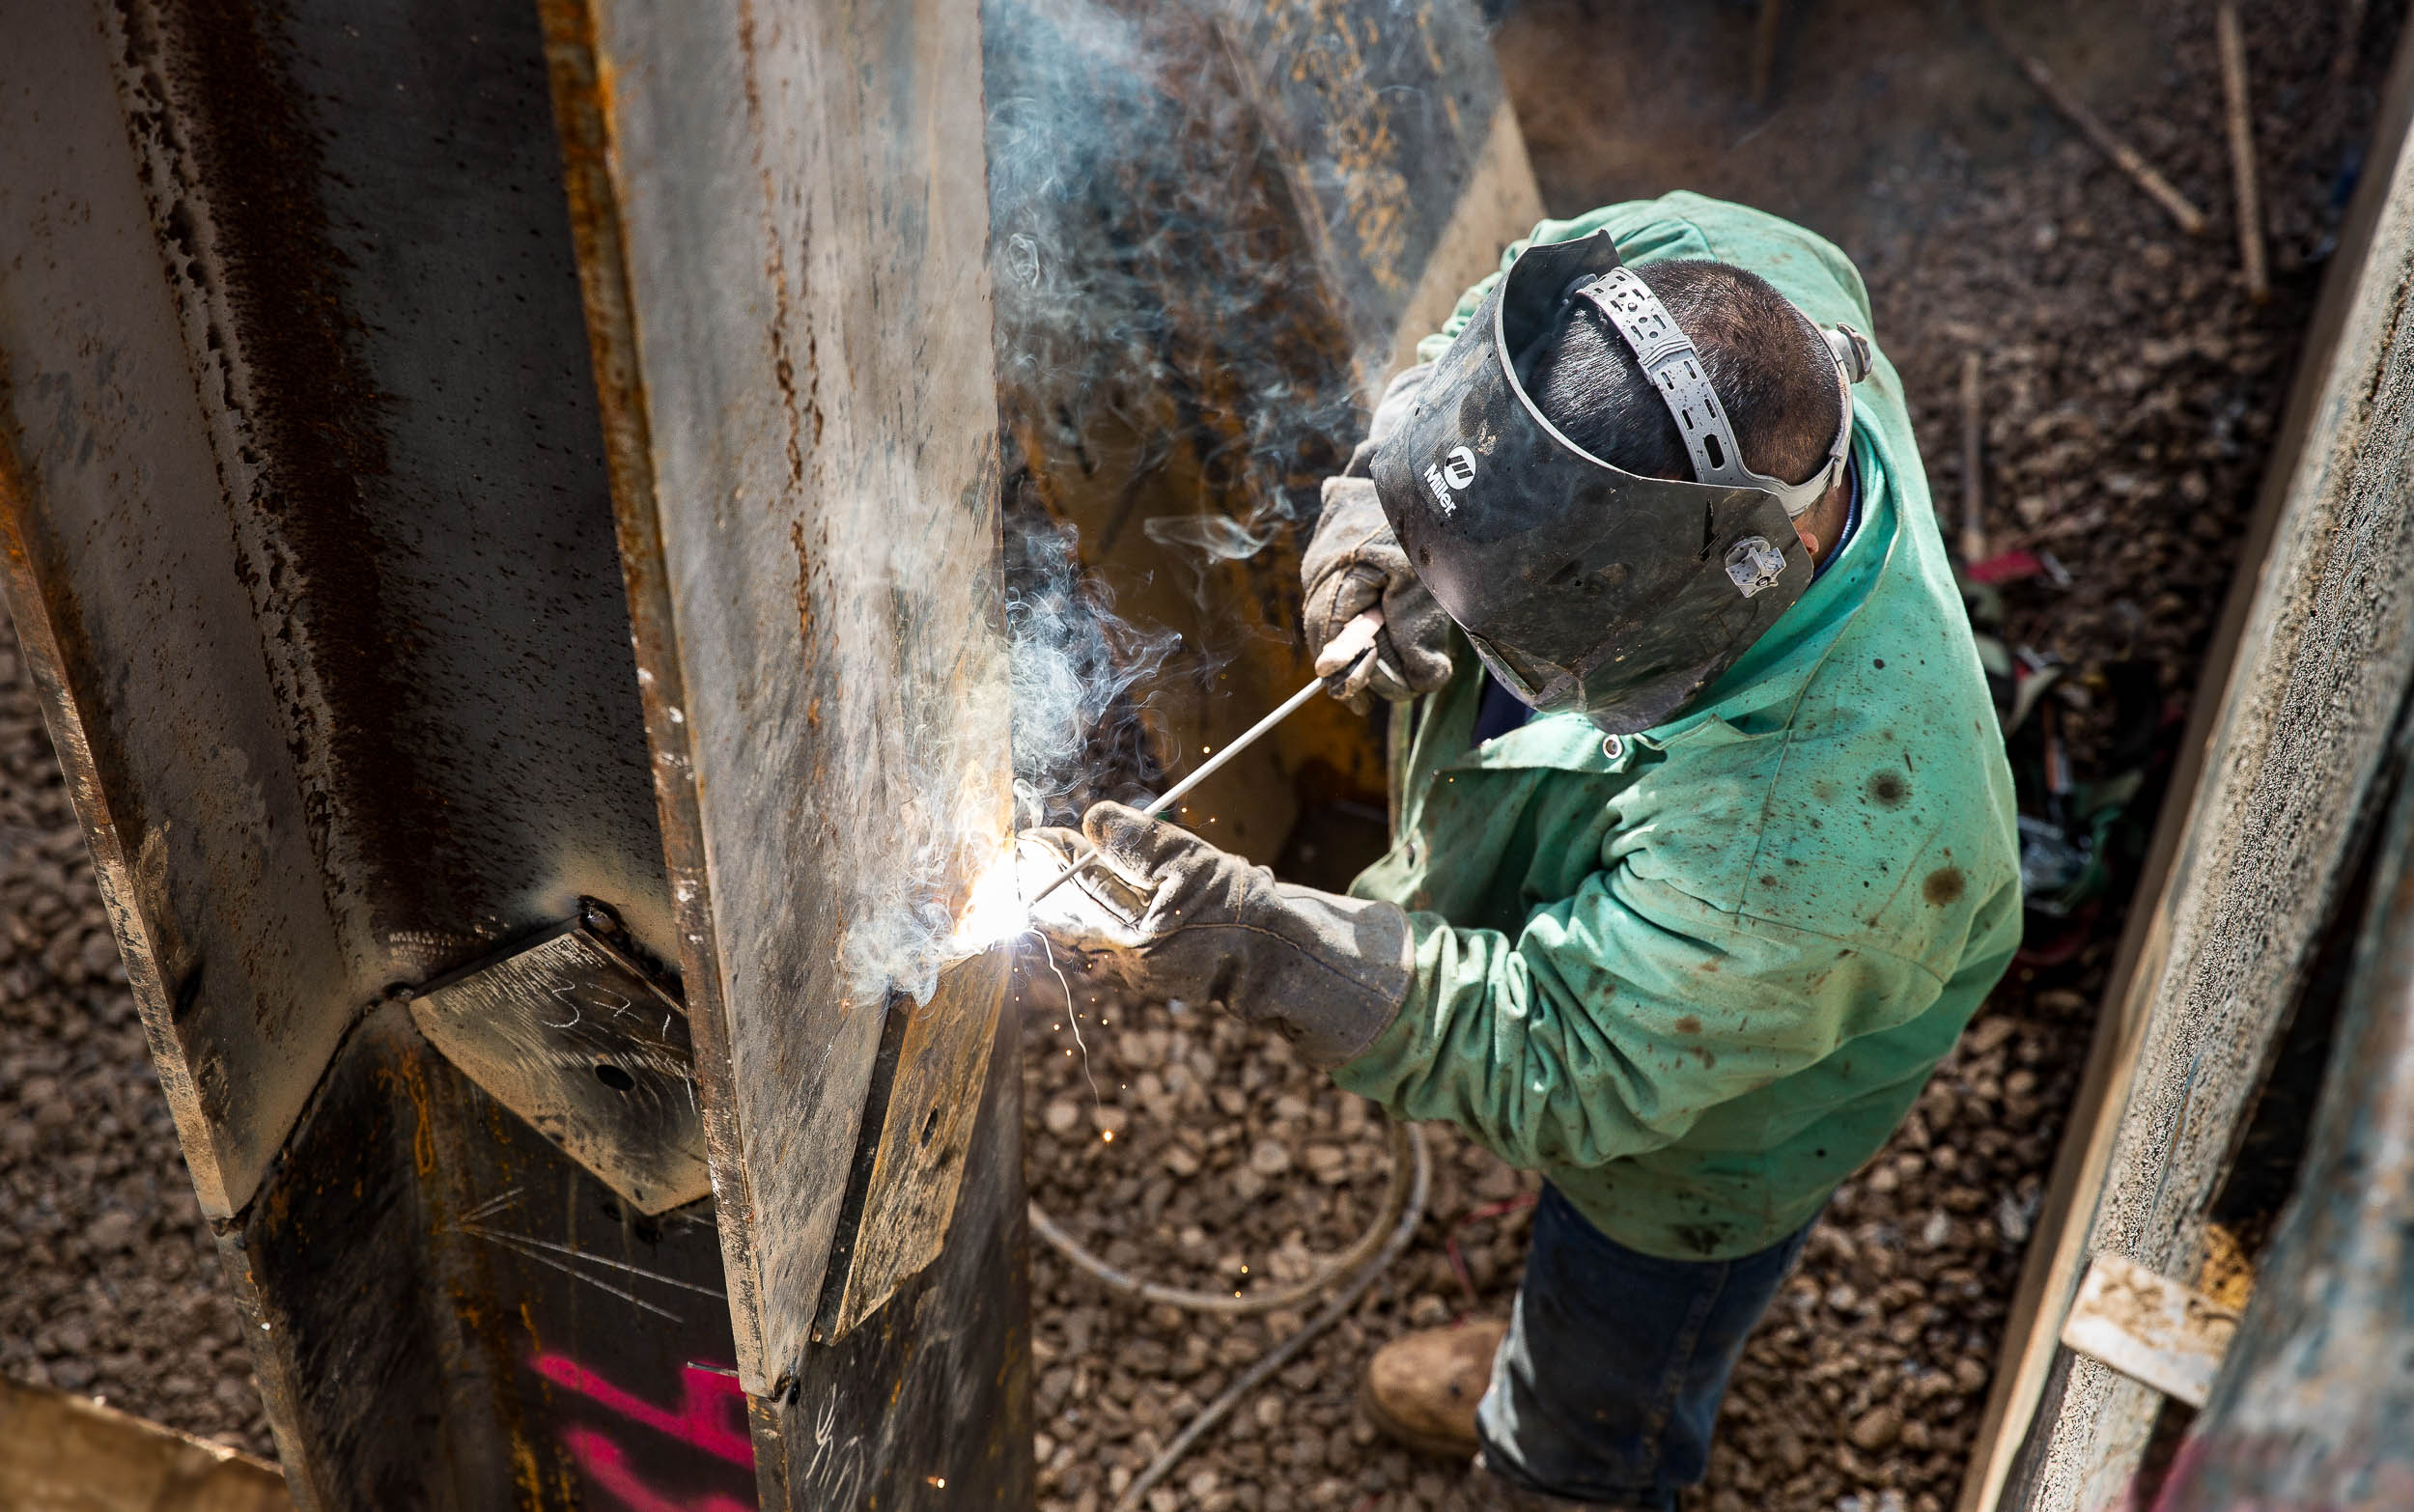 Iron Worker Welds While Photo is Taken by Atlanta Photographer